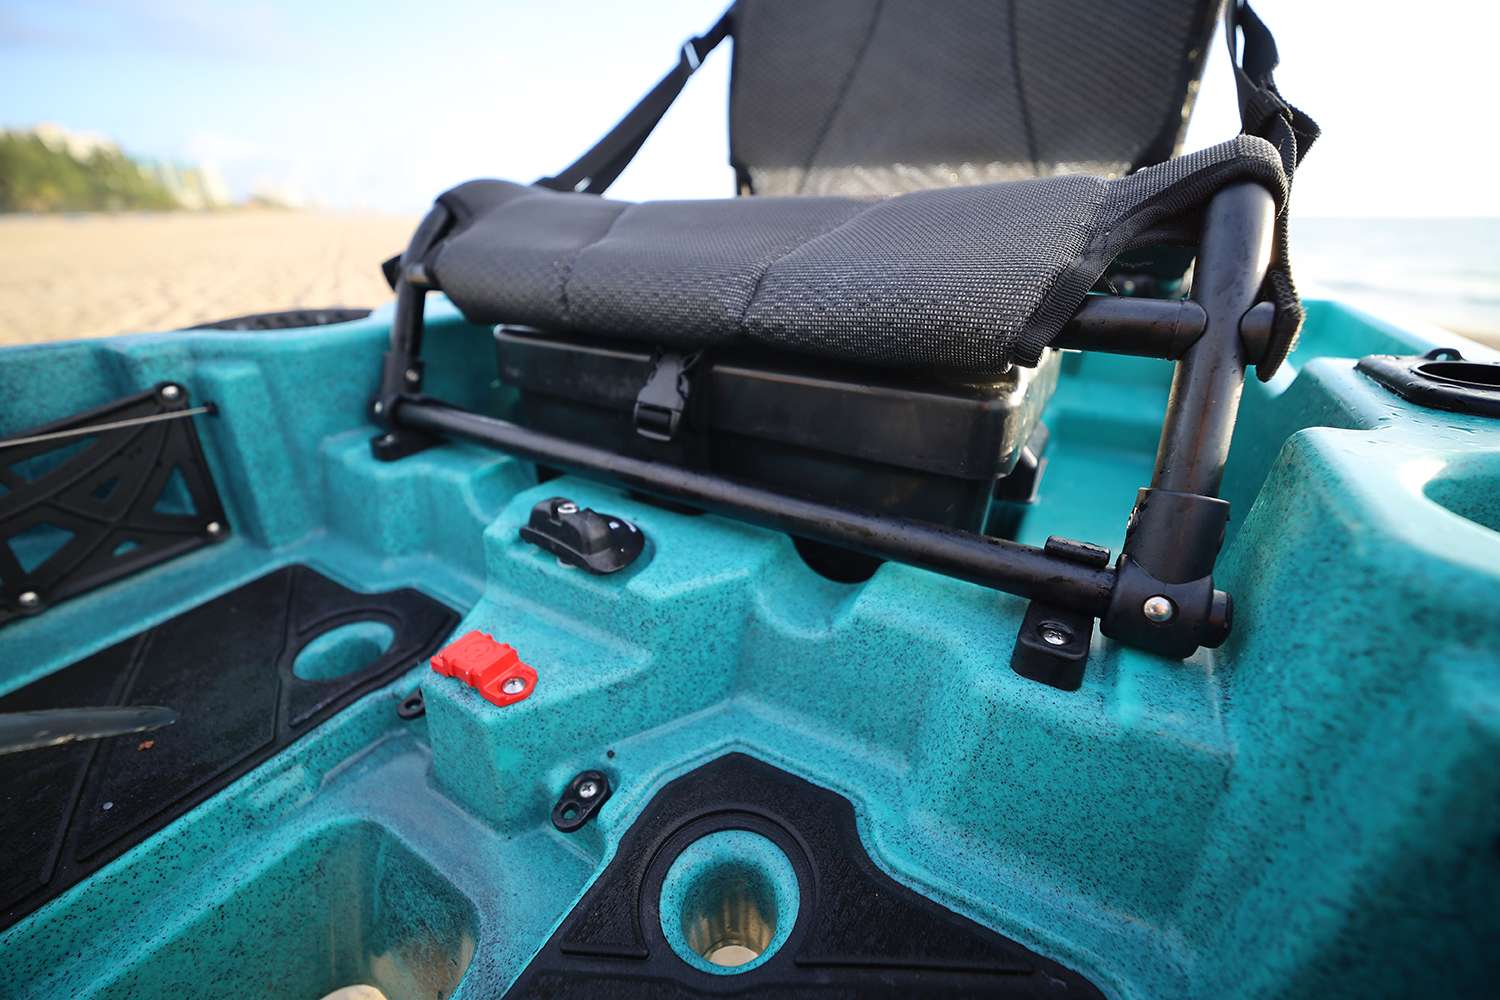 Here's a look at the front of the seat and how it secures to the boat.